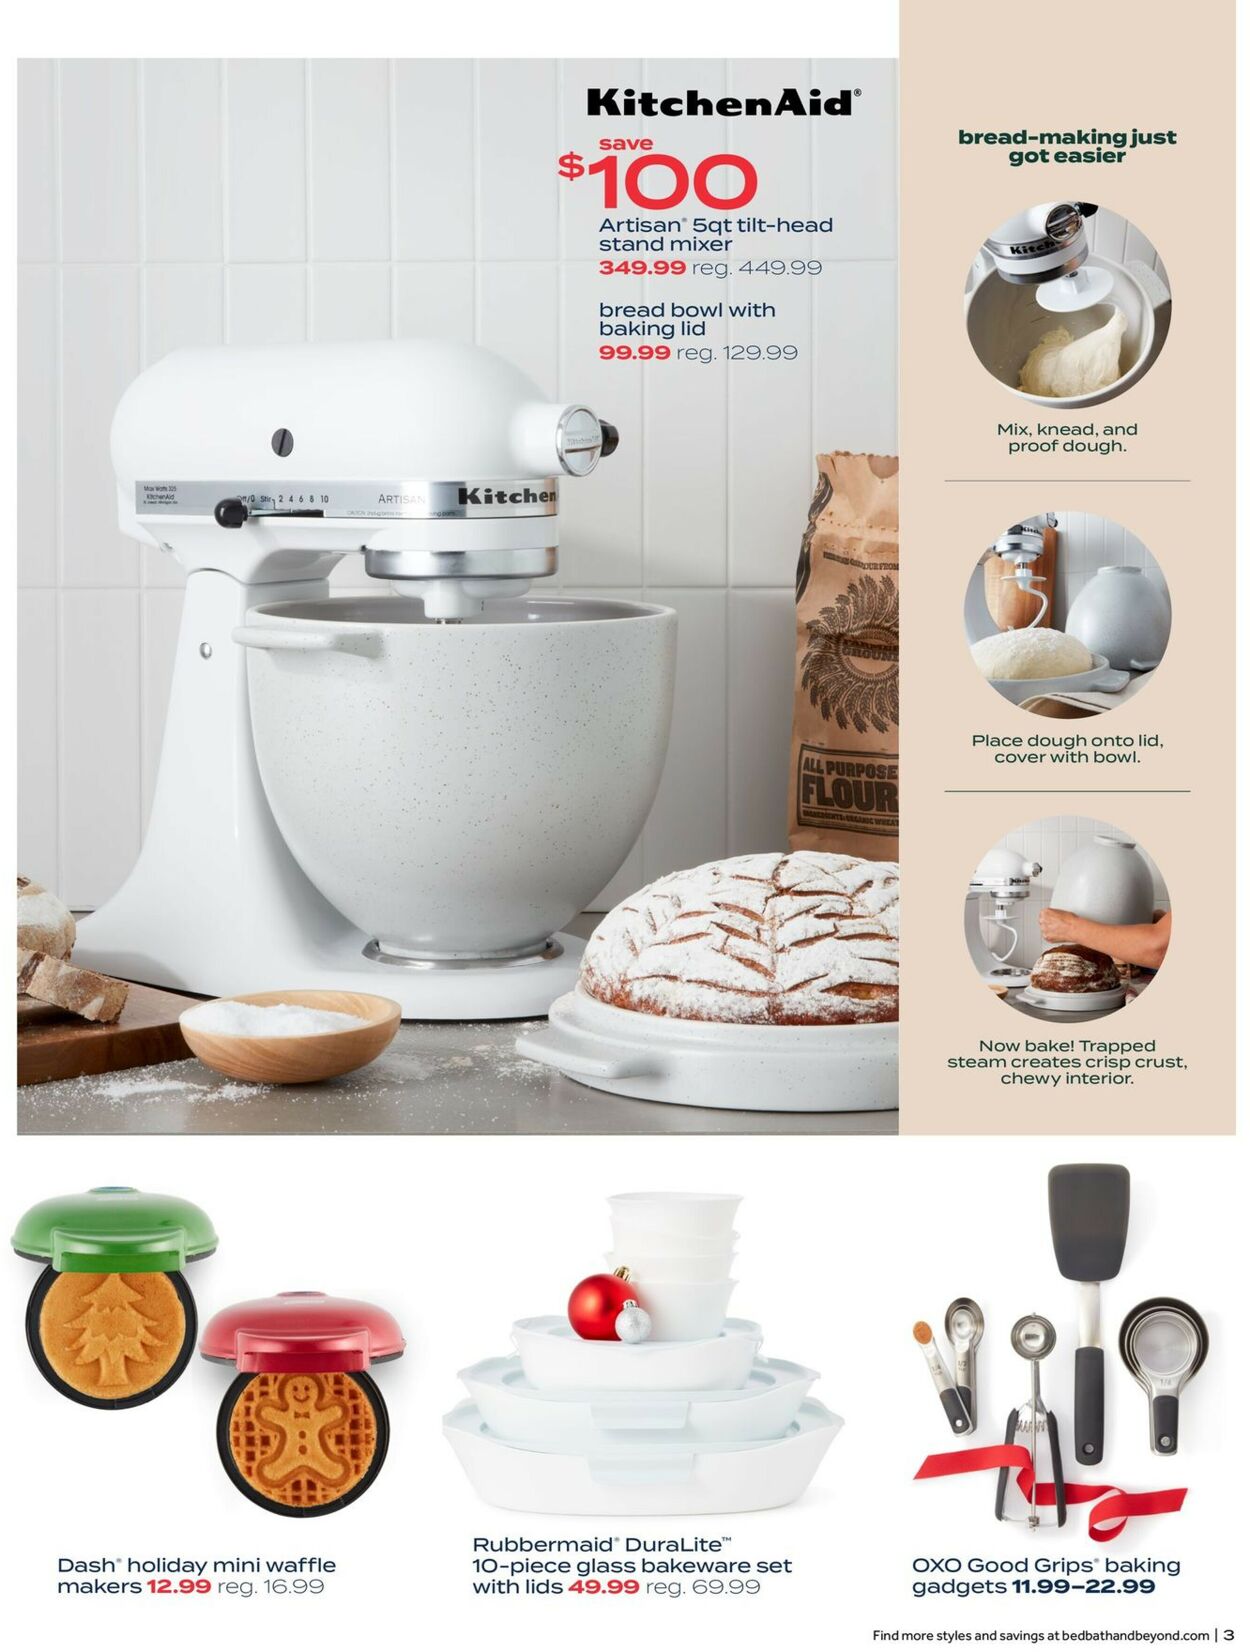 Bed Bath and Beyond Ad from 11/29/2022